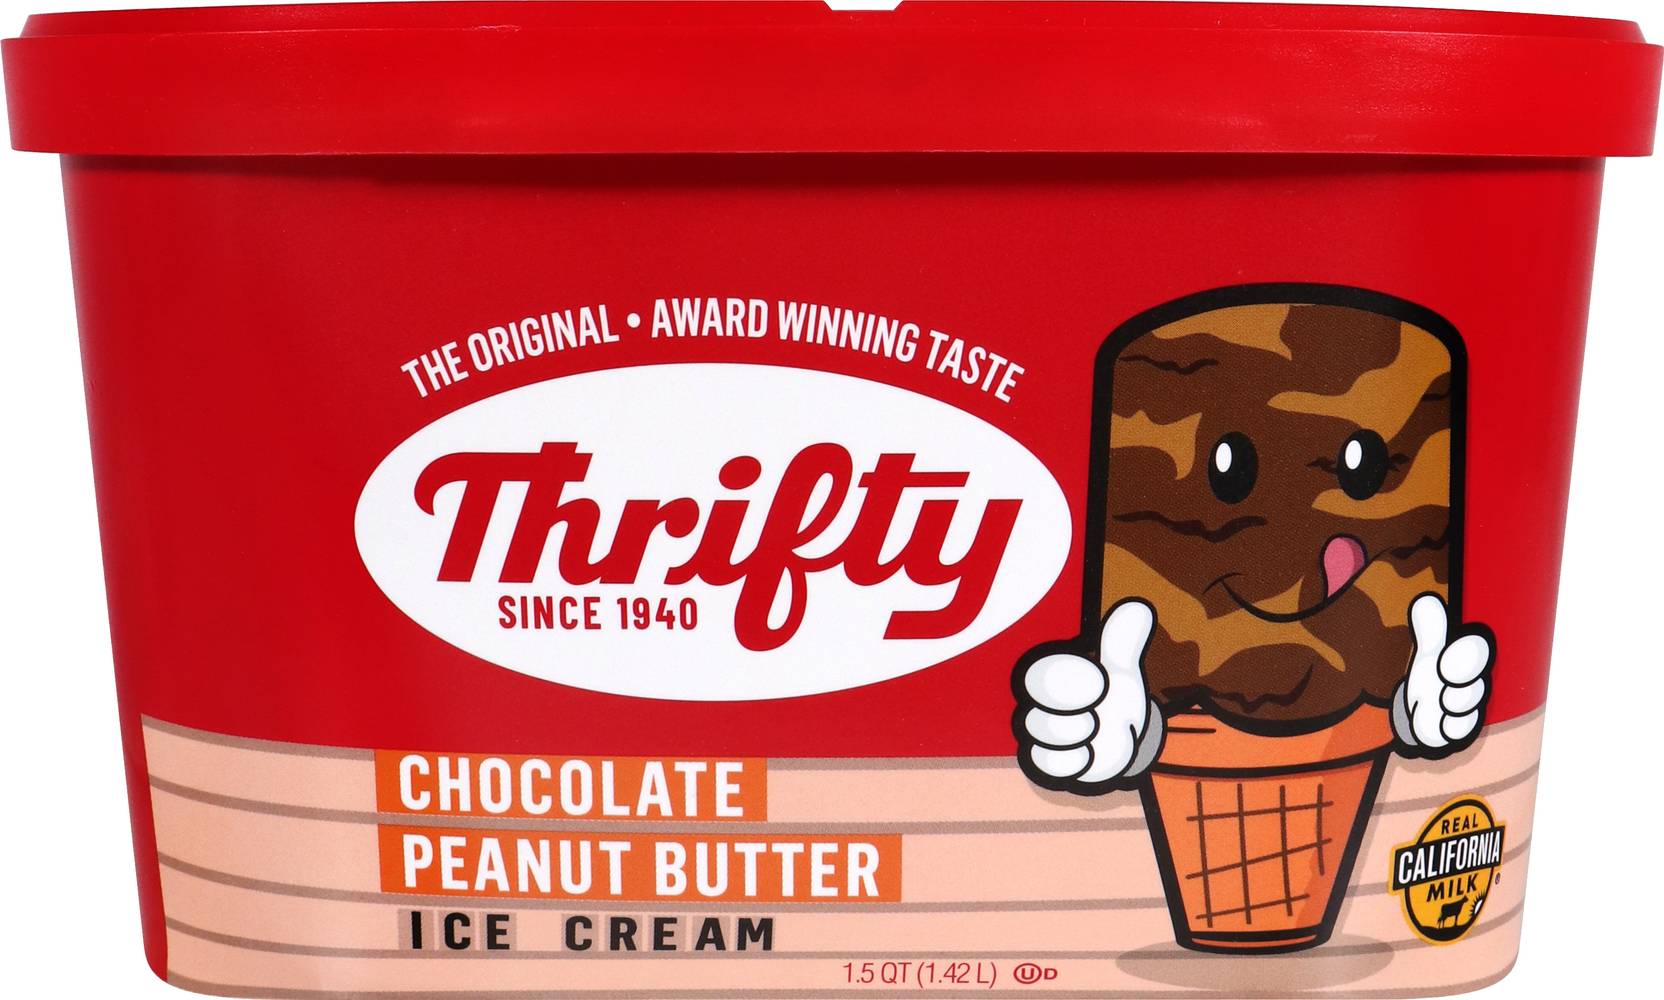 Thrifty Chocolate Peanut Butter Ice Cream Cup (48 oz)